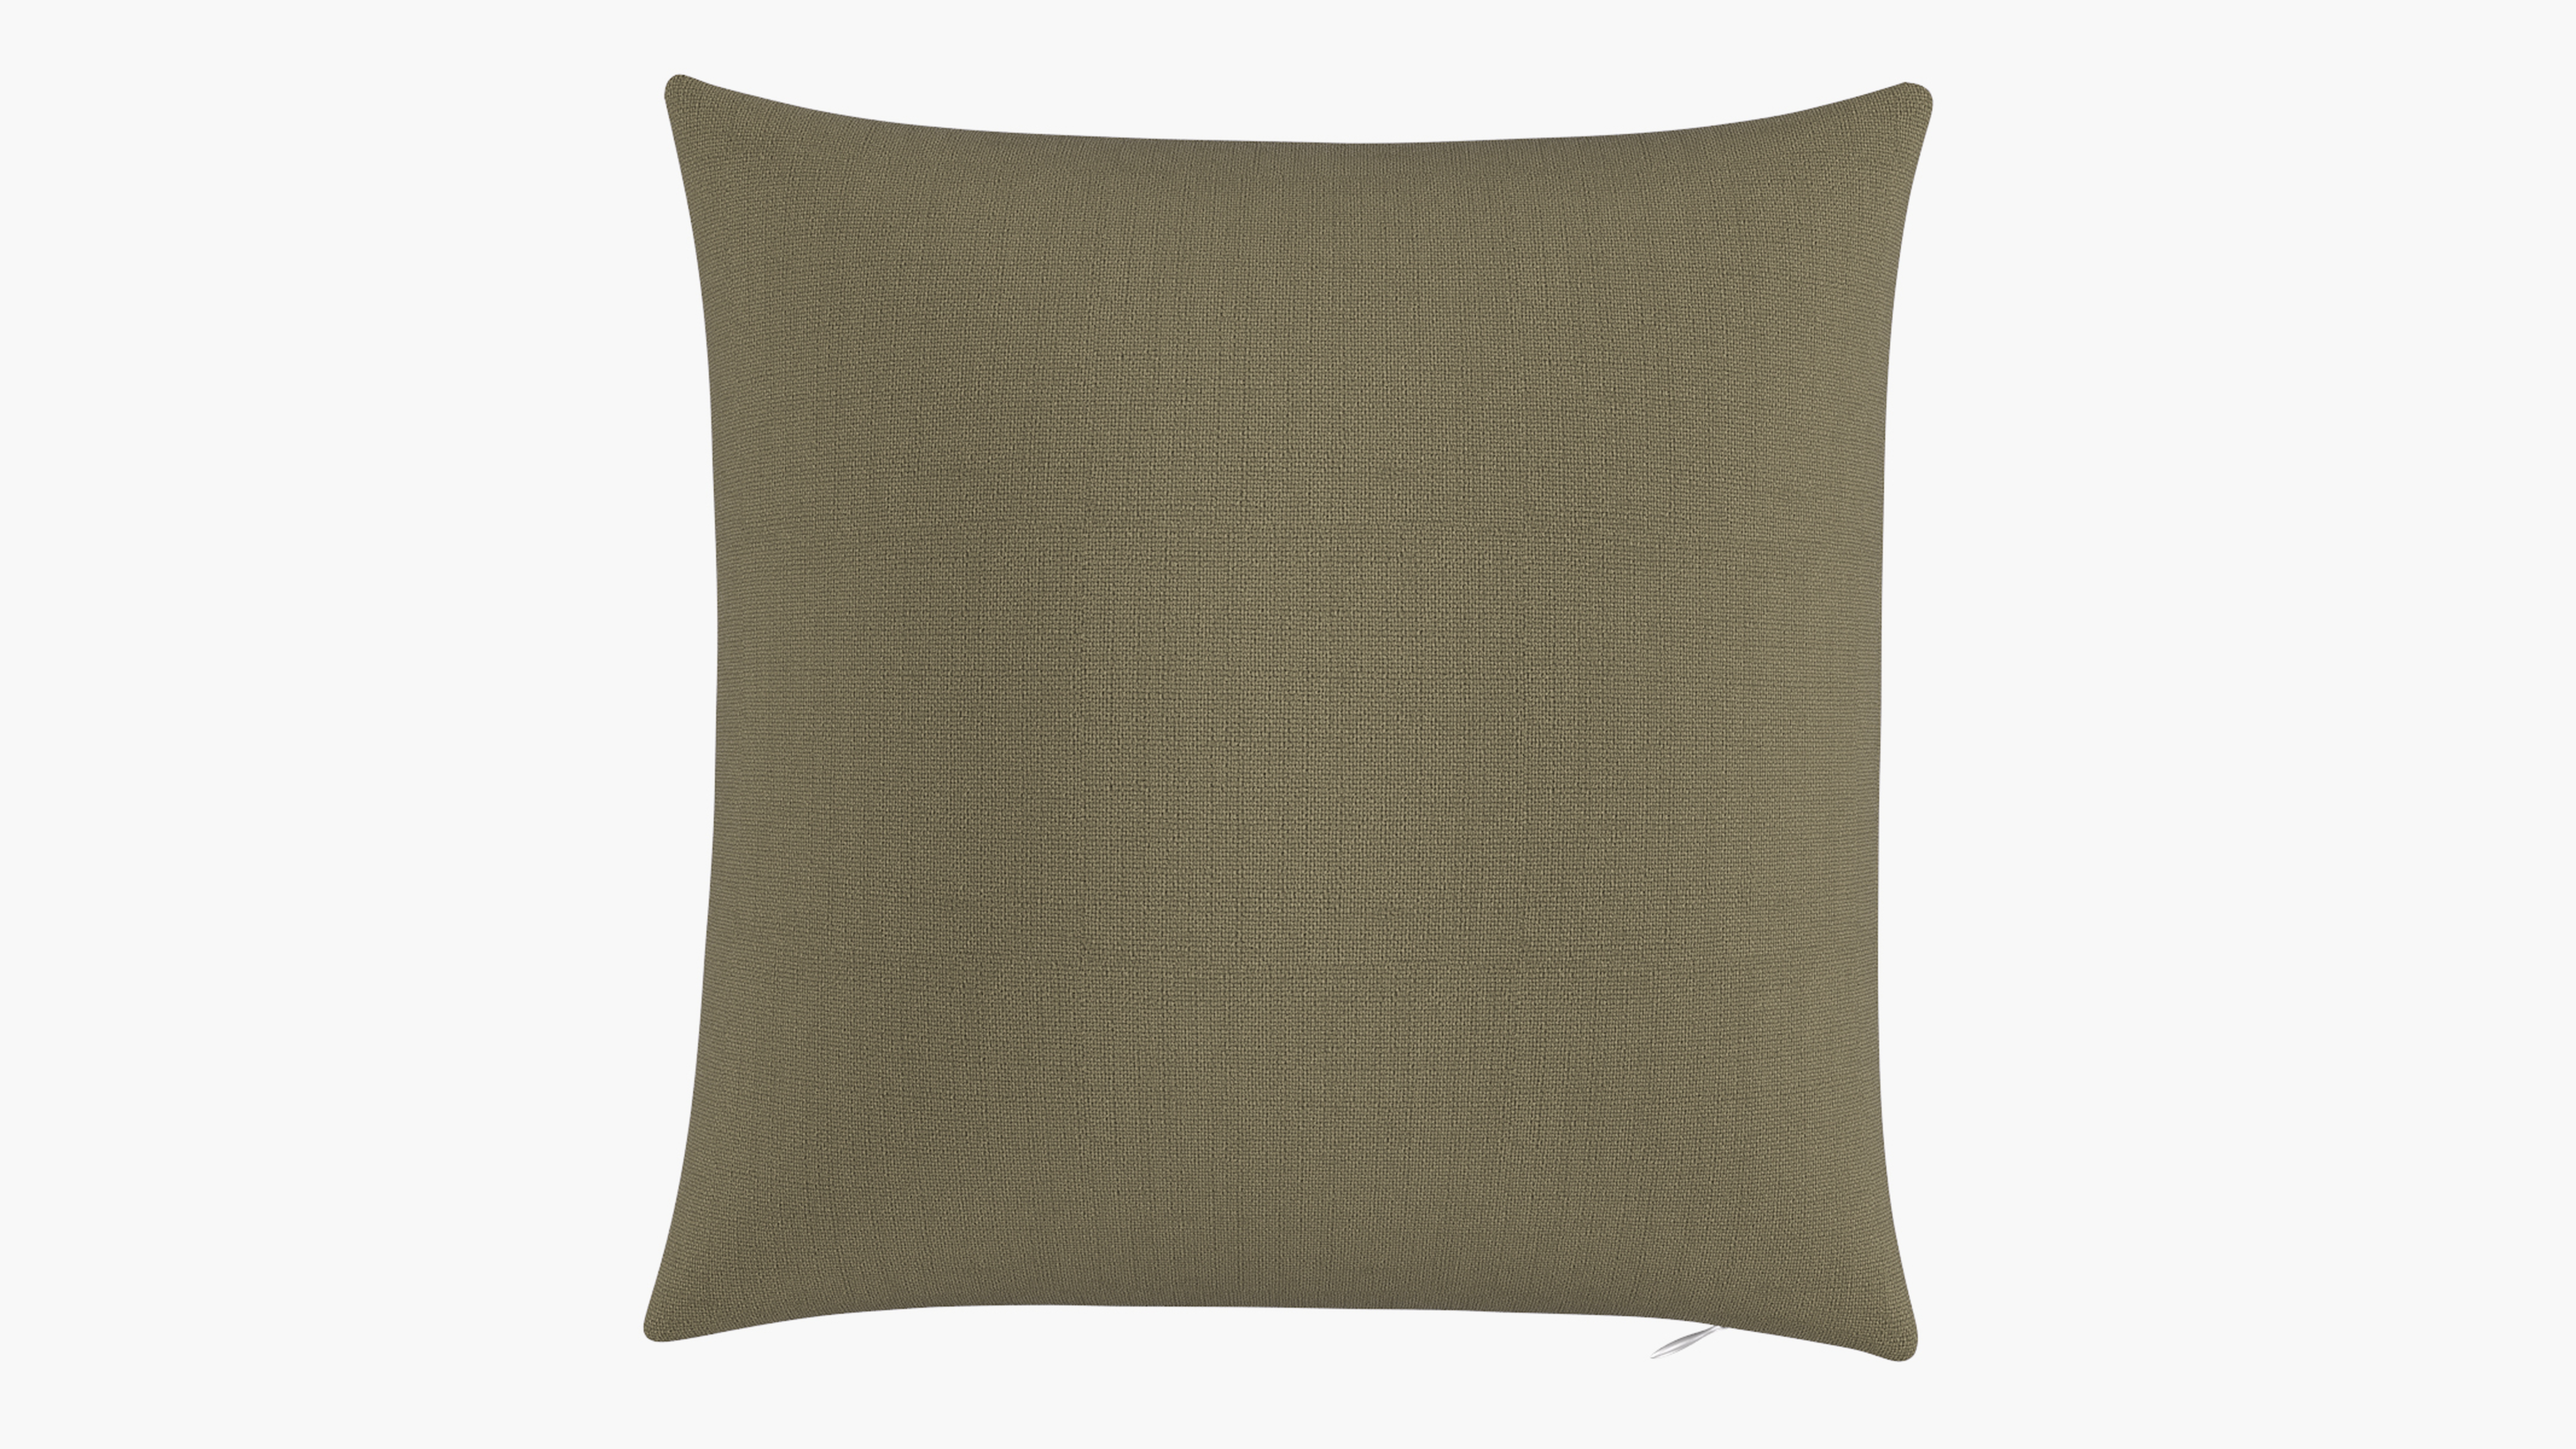 Throw Pillow 18", Olive Linen, 18" x 18" - The Inside